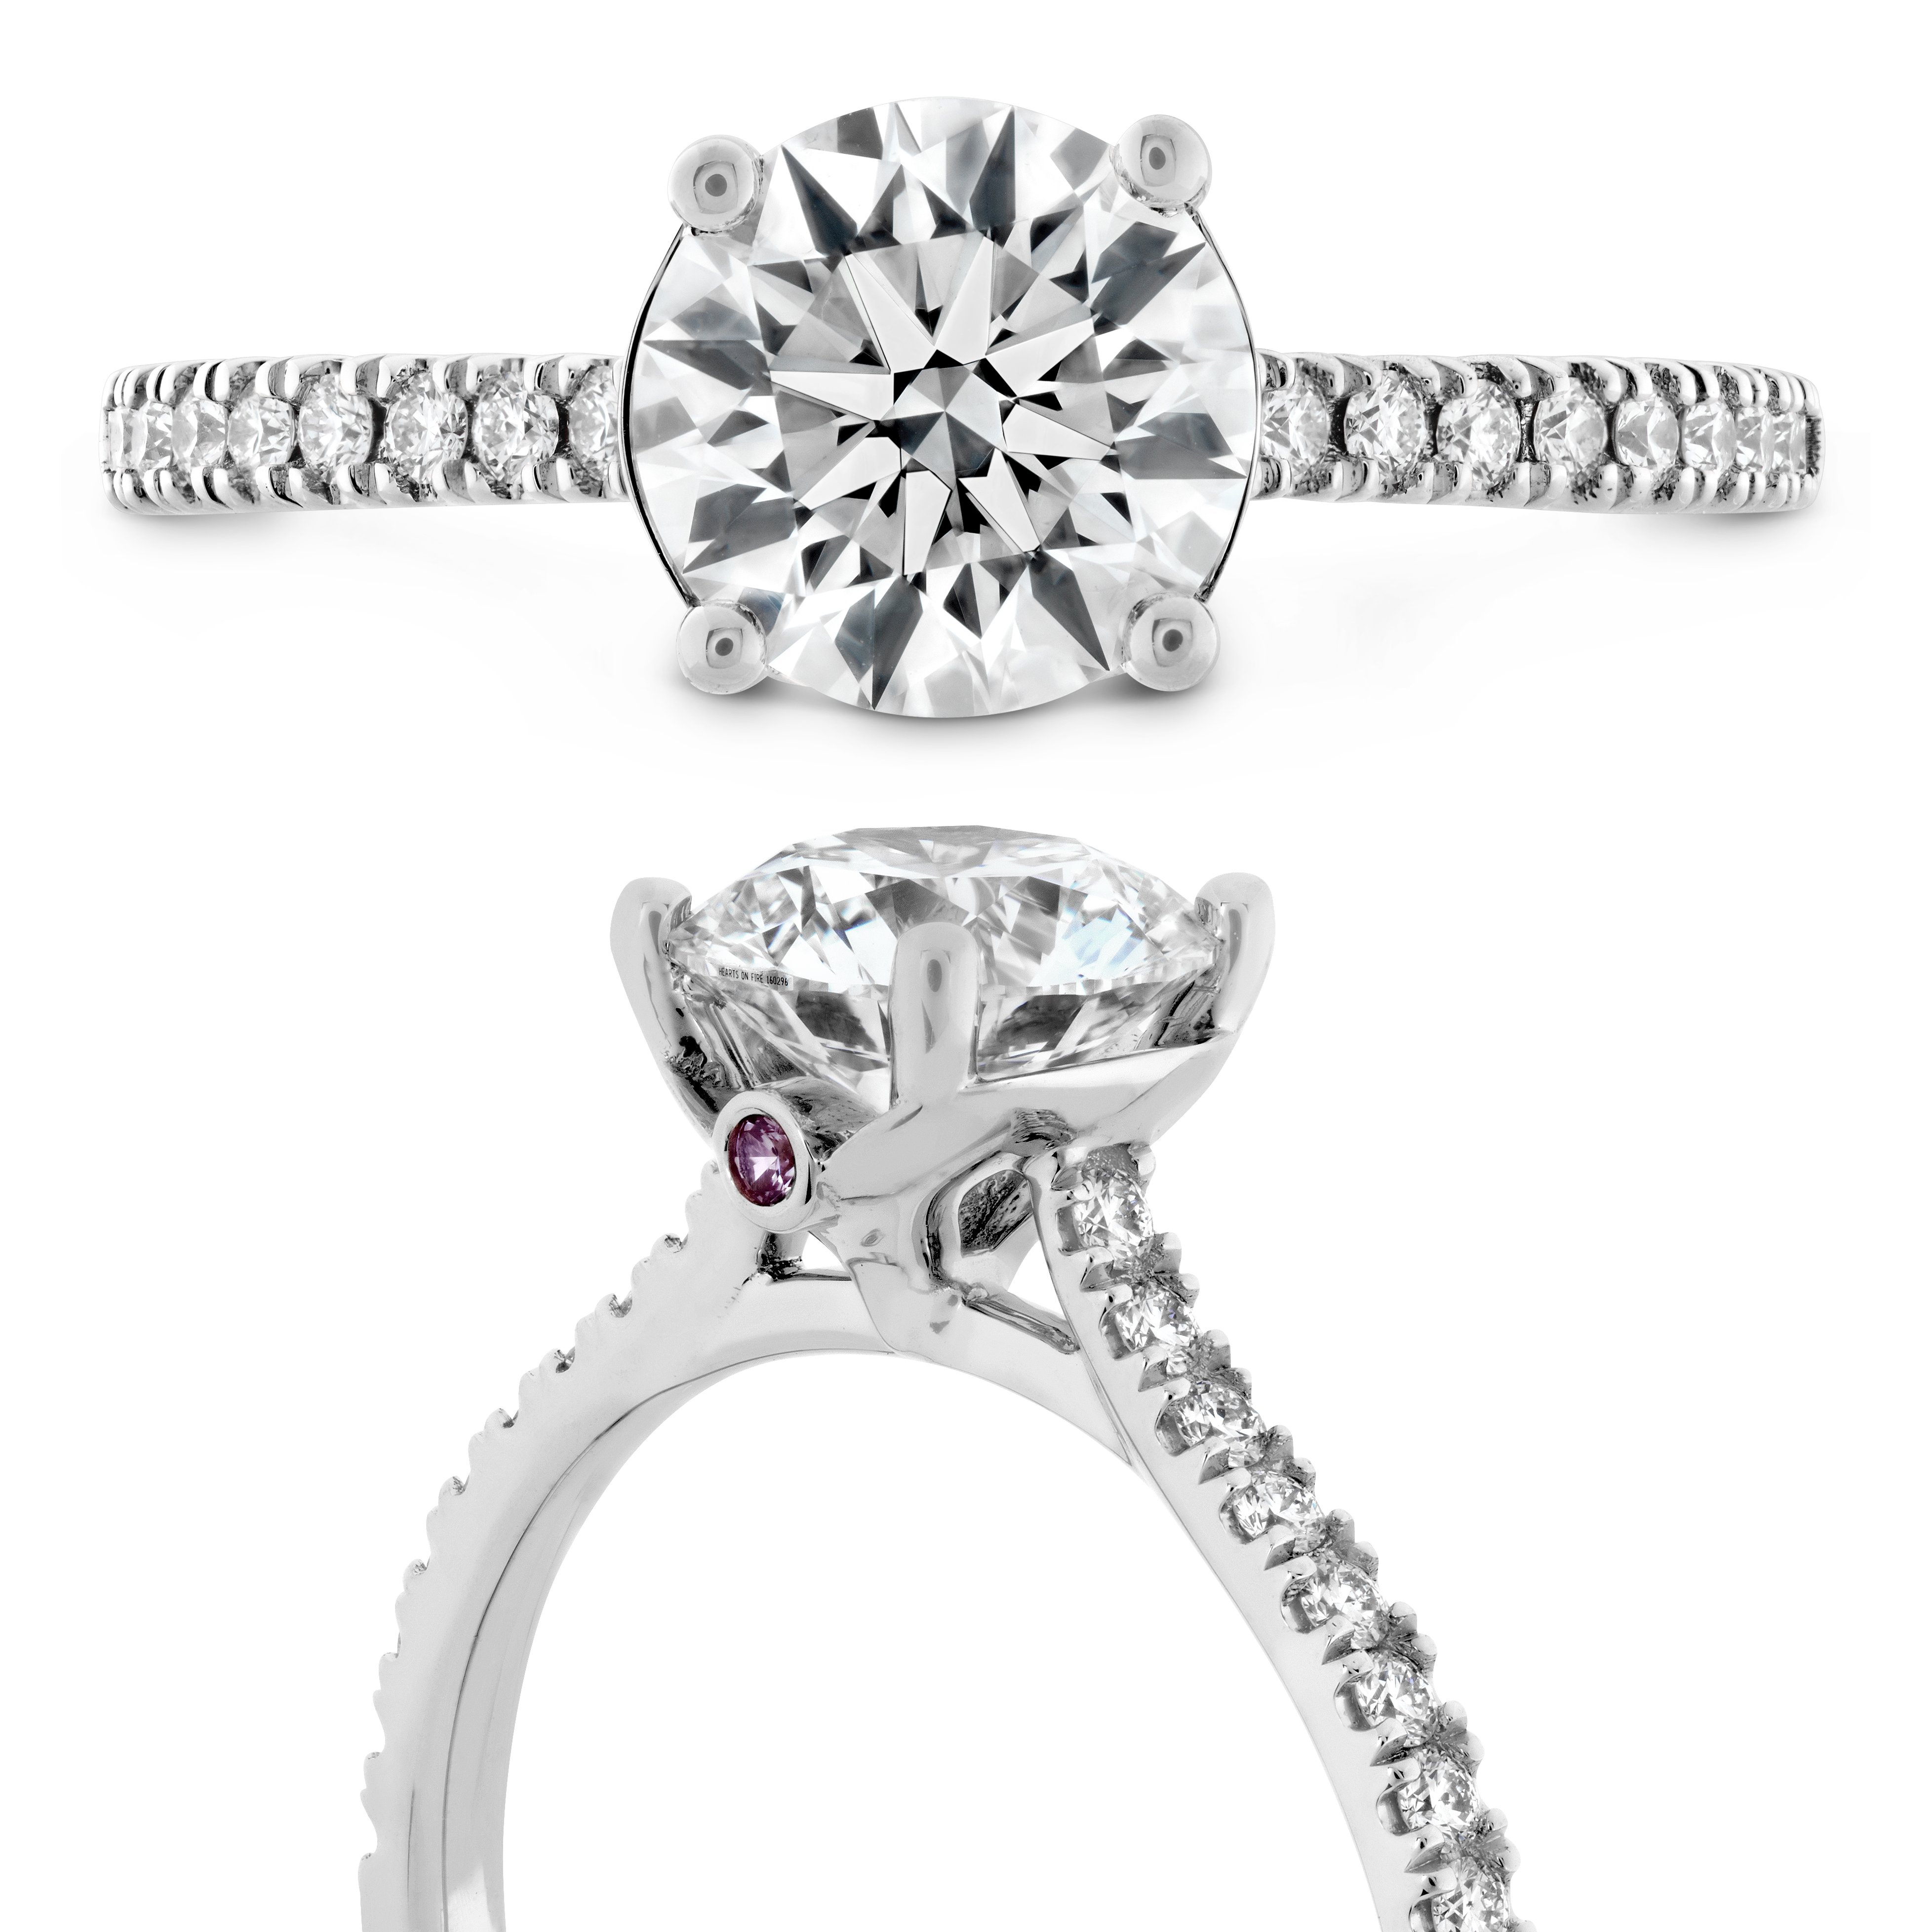 https://www.arthursjewelers.com/content/images/thumbs/Original/Sloane Silhouette Engagement Ring Diamond Band with Sapphires_3-176288851.jpg